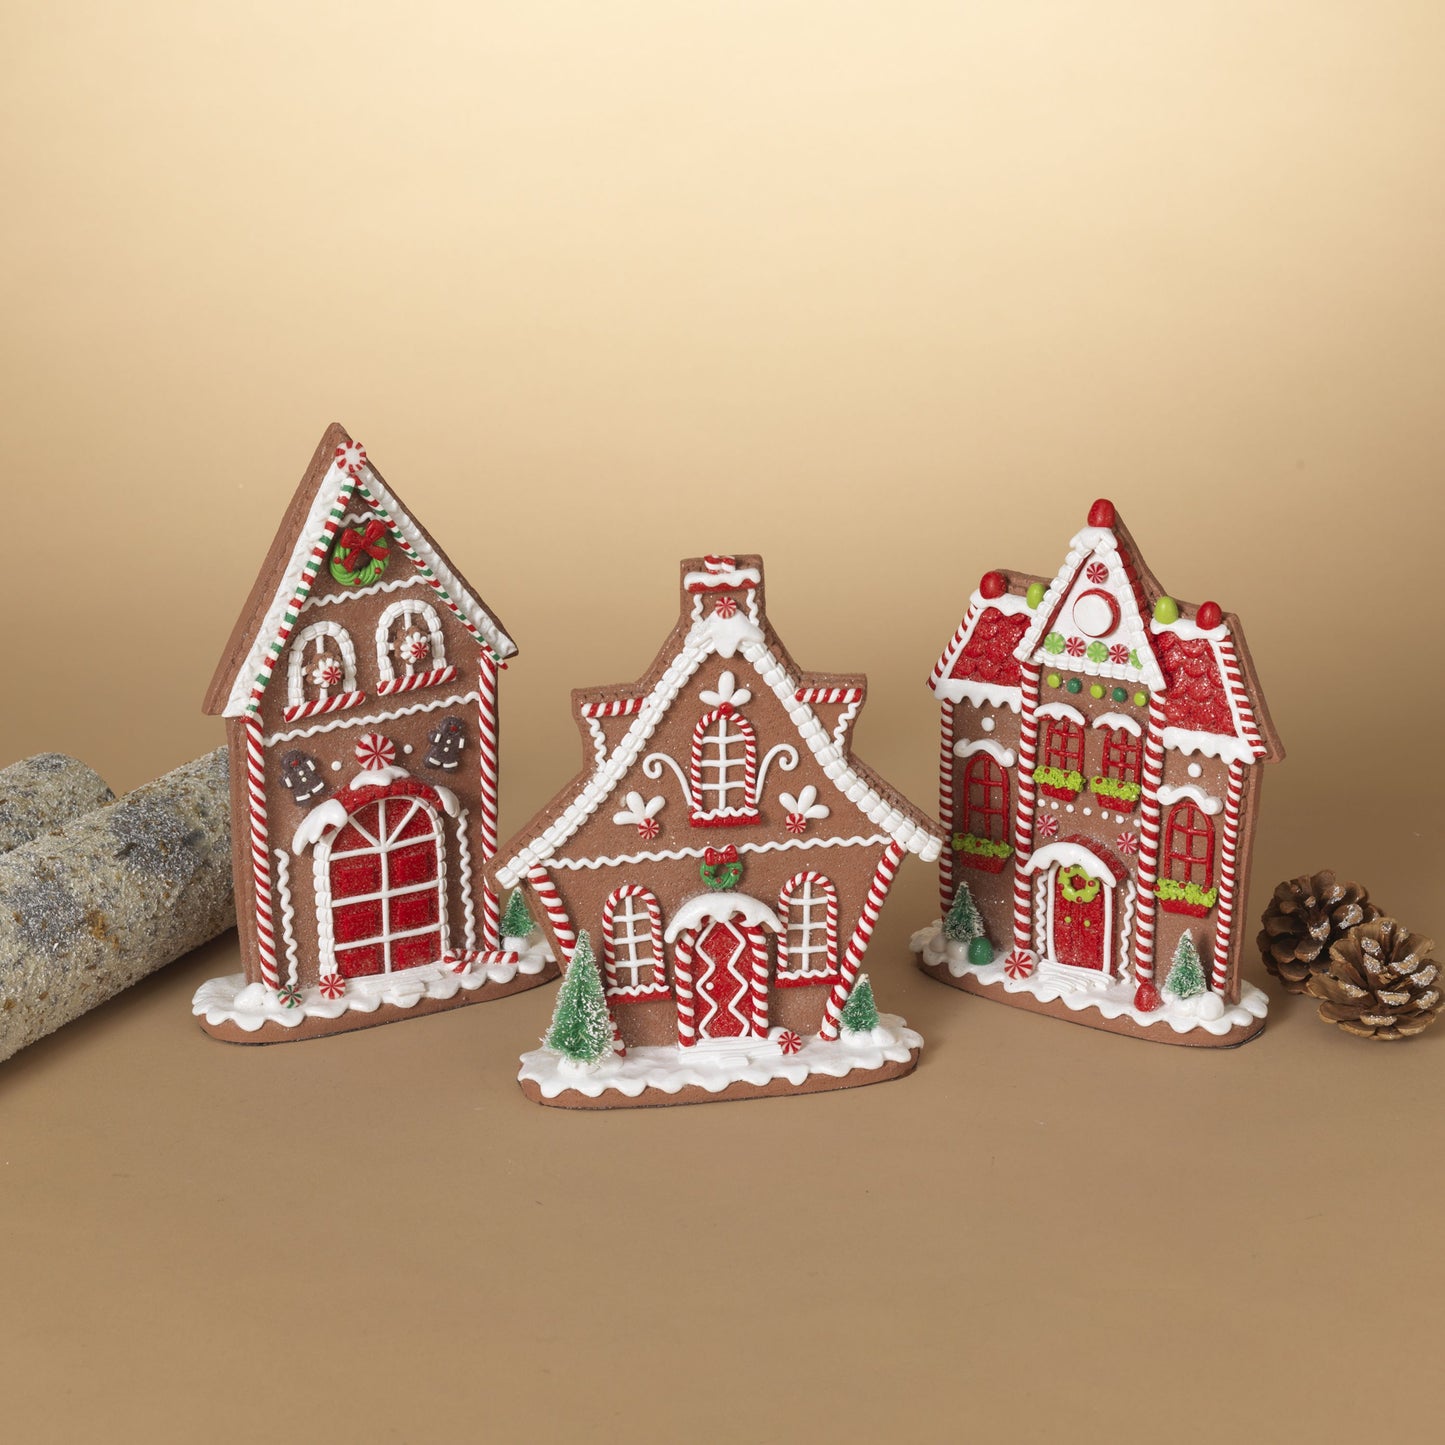 Gerson Company 10.5"H Holiday Gingerbread House, 3 Asst